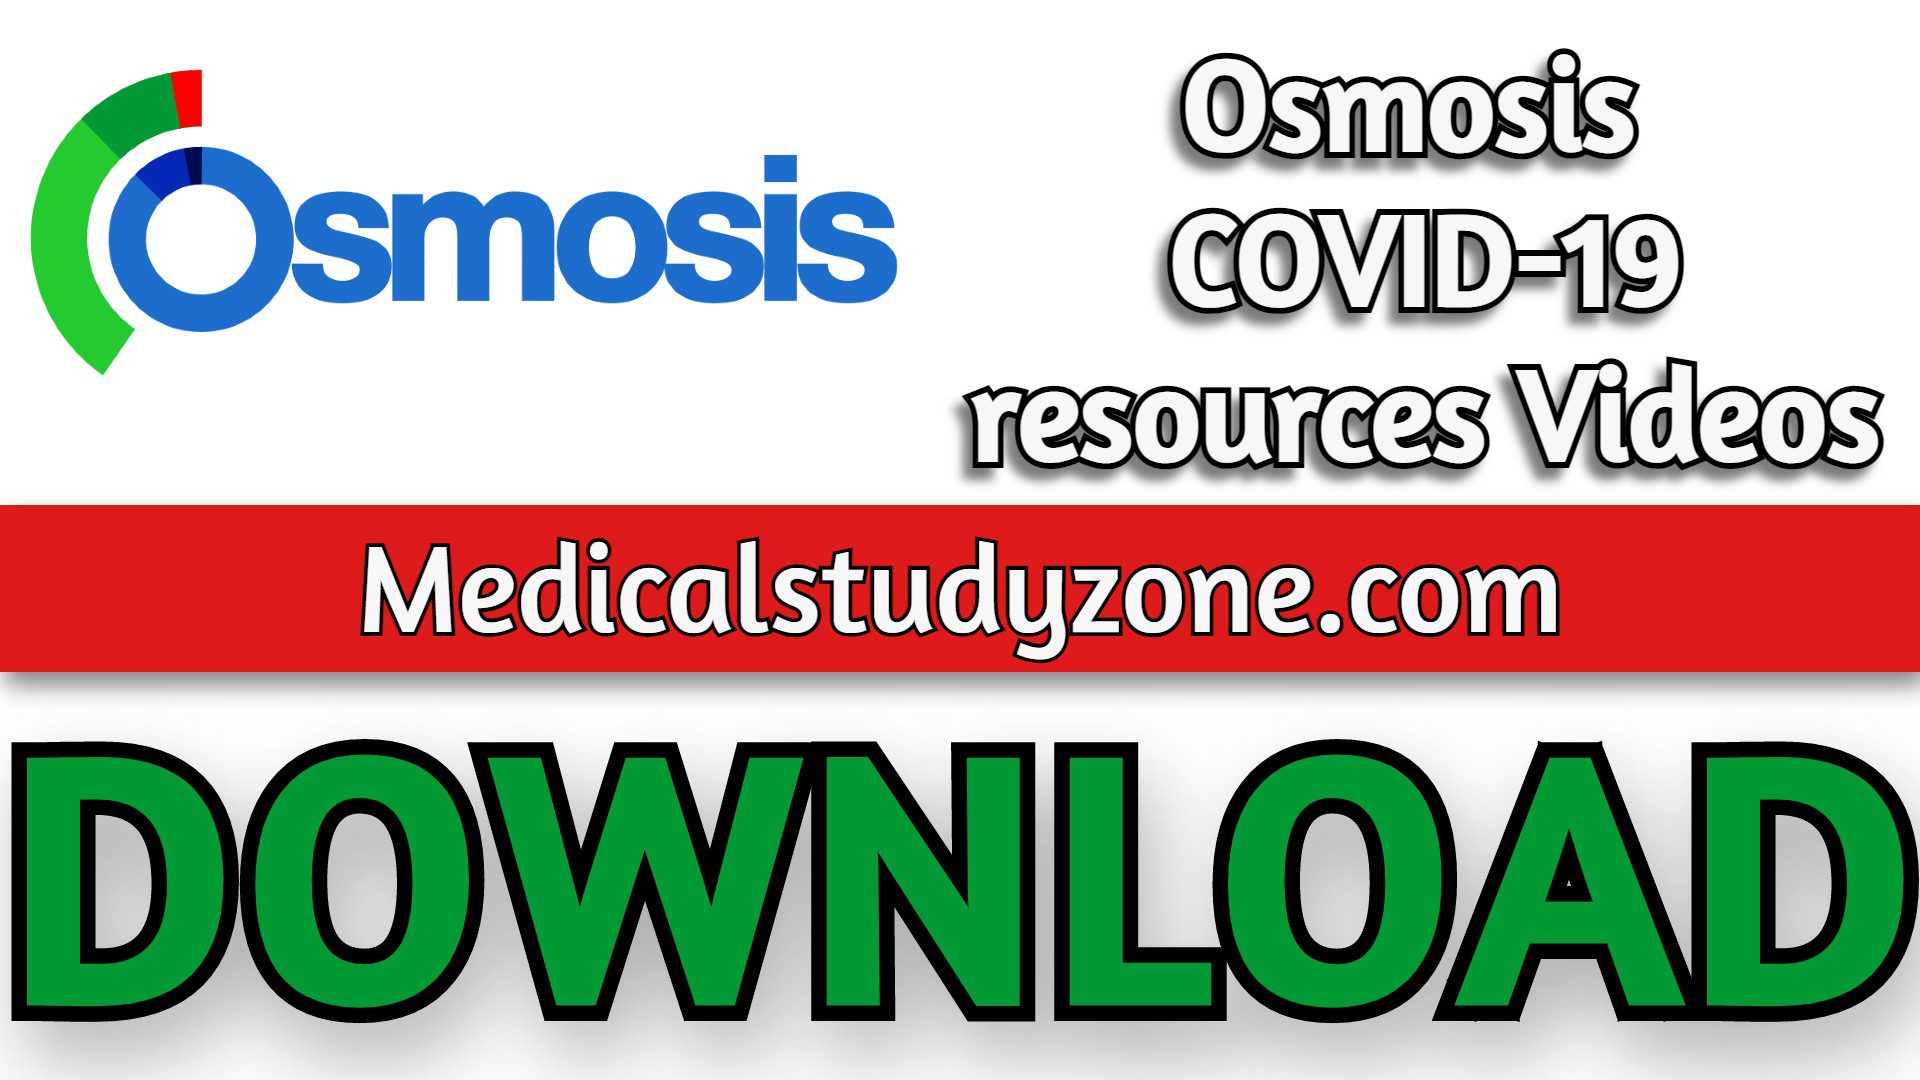 Osmosis COVID-19 resources Videos 2023 Free Download